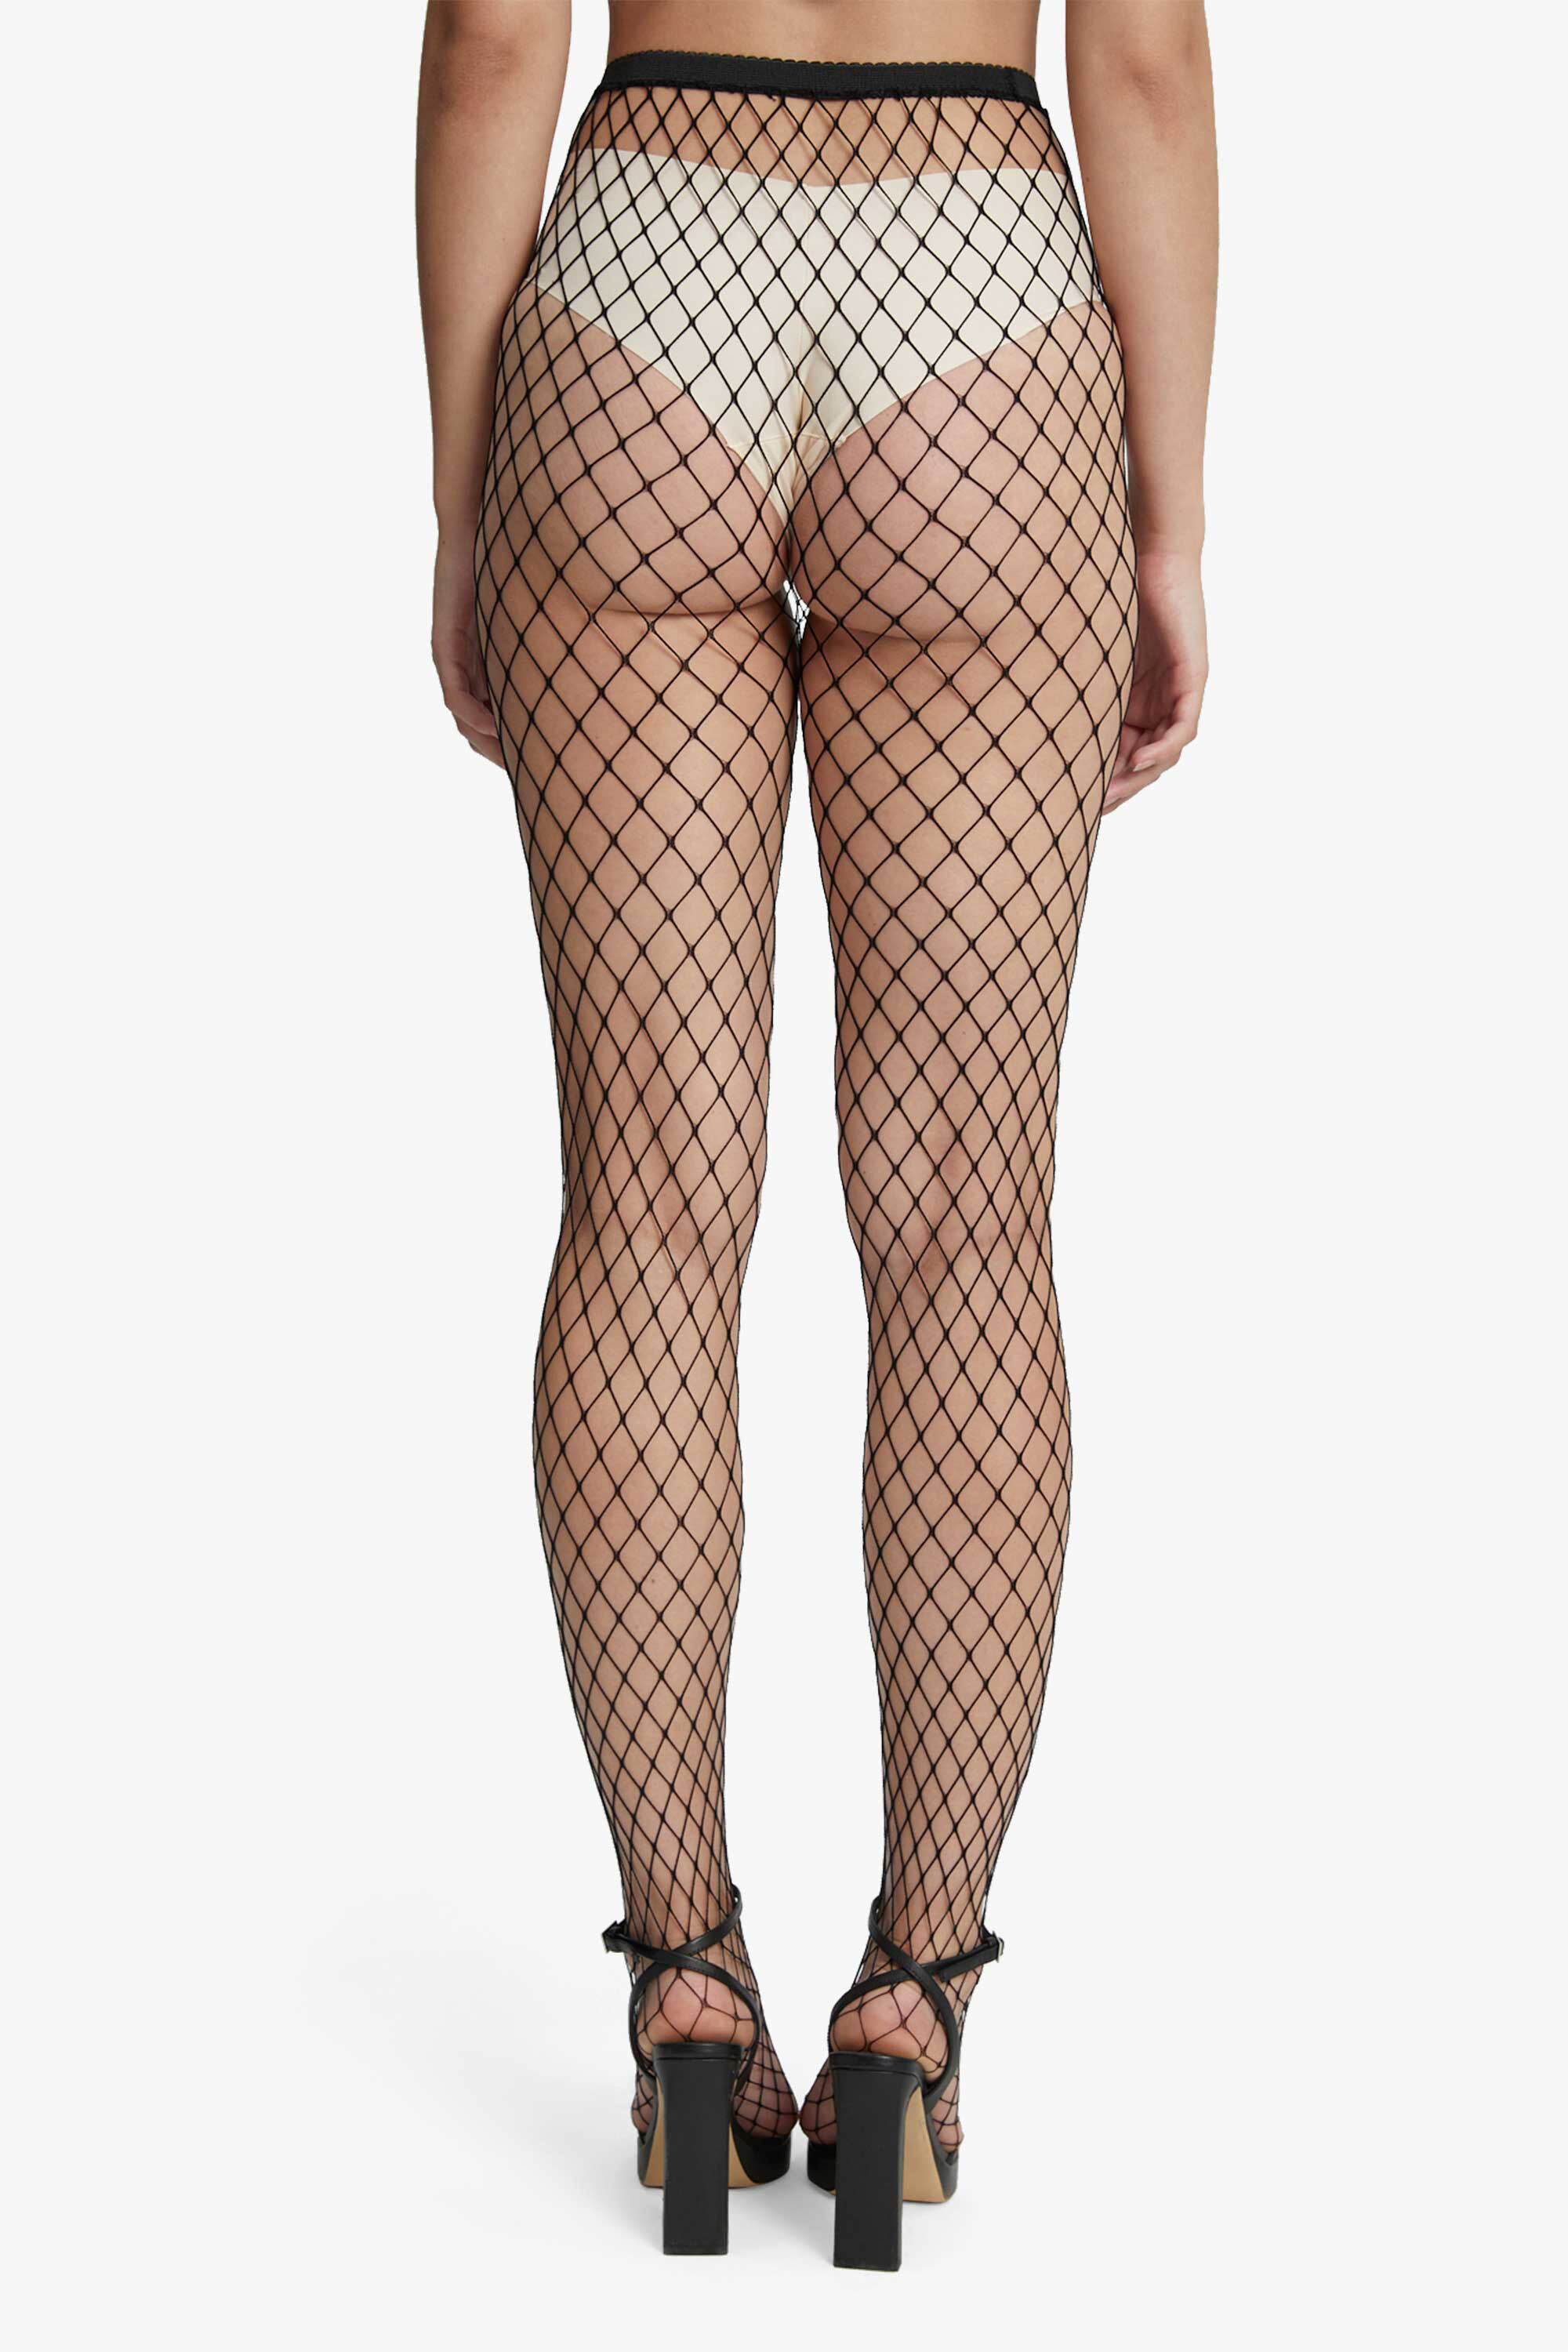 INDUSTRIAL NET TIGHTS, White Spandex Fishnet Pantyhose, Dancewear, Cosplay  Costumes, Pin up Stockings -  Norway